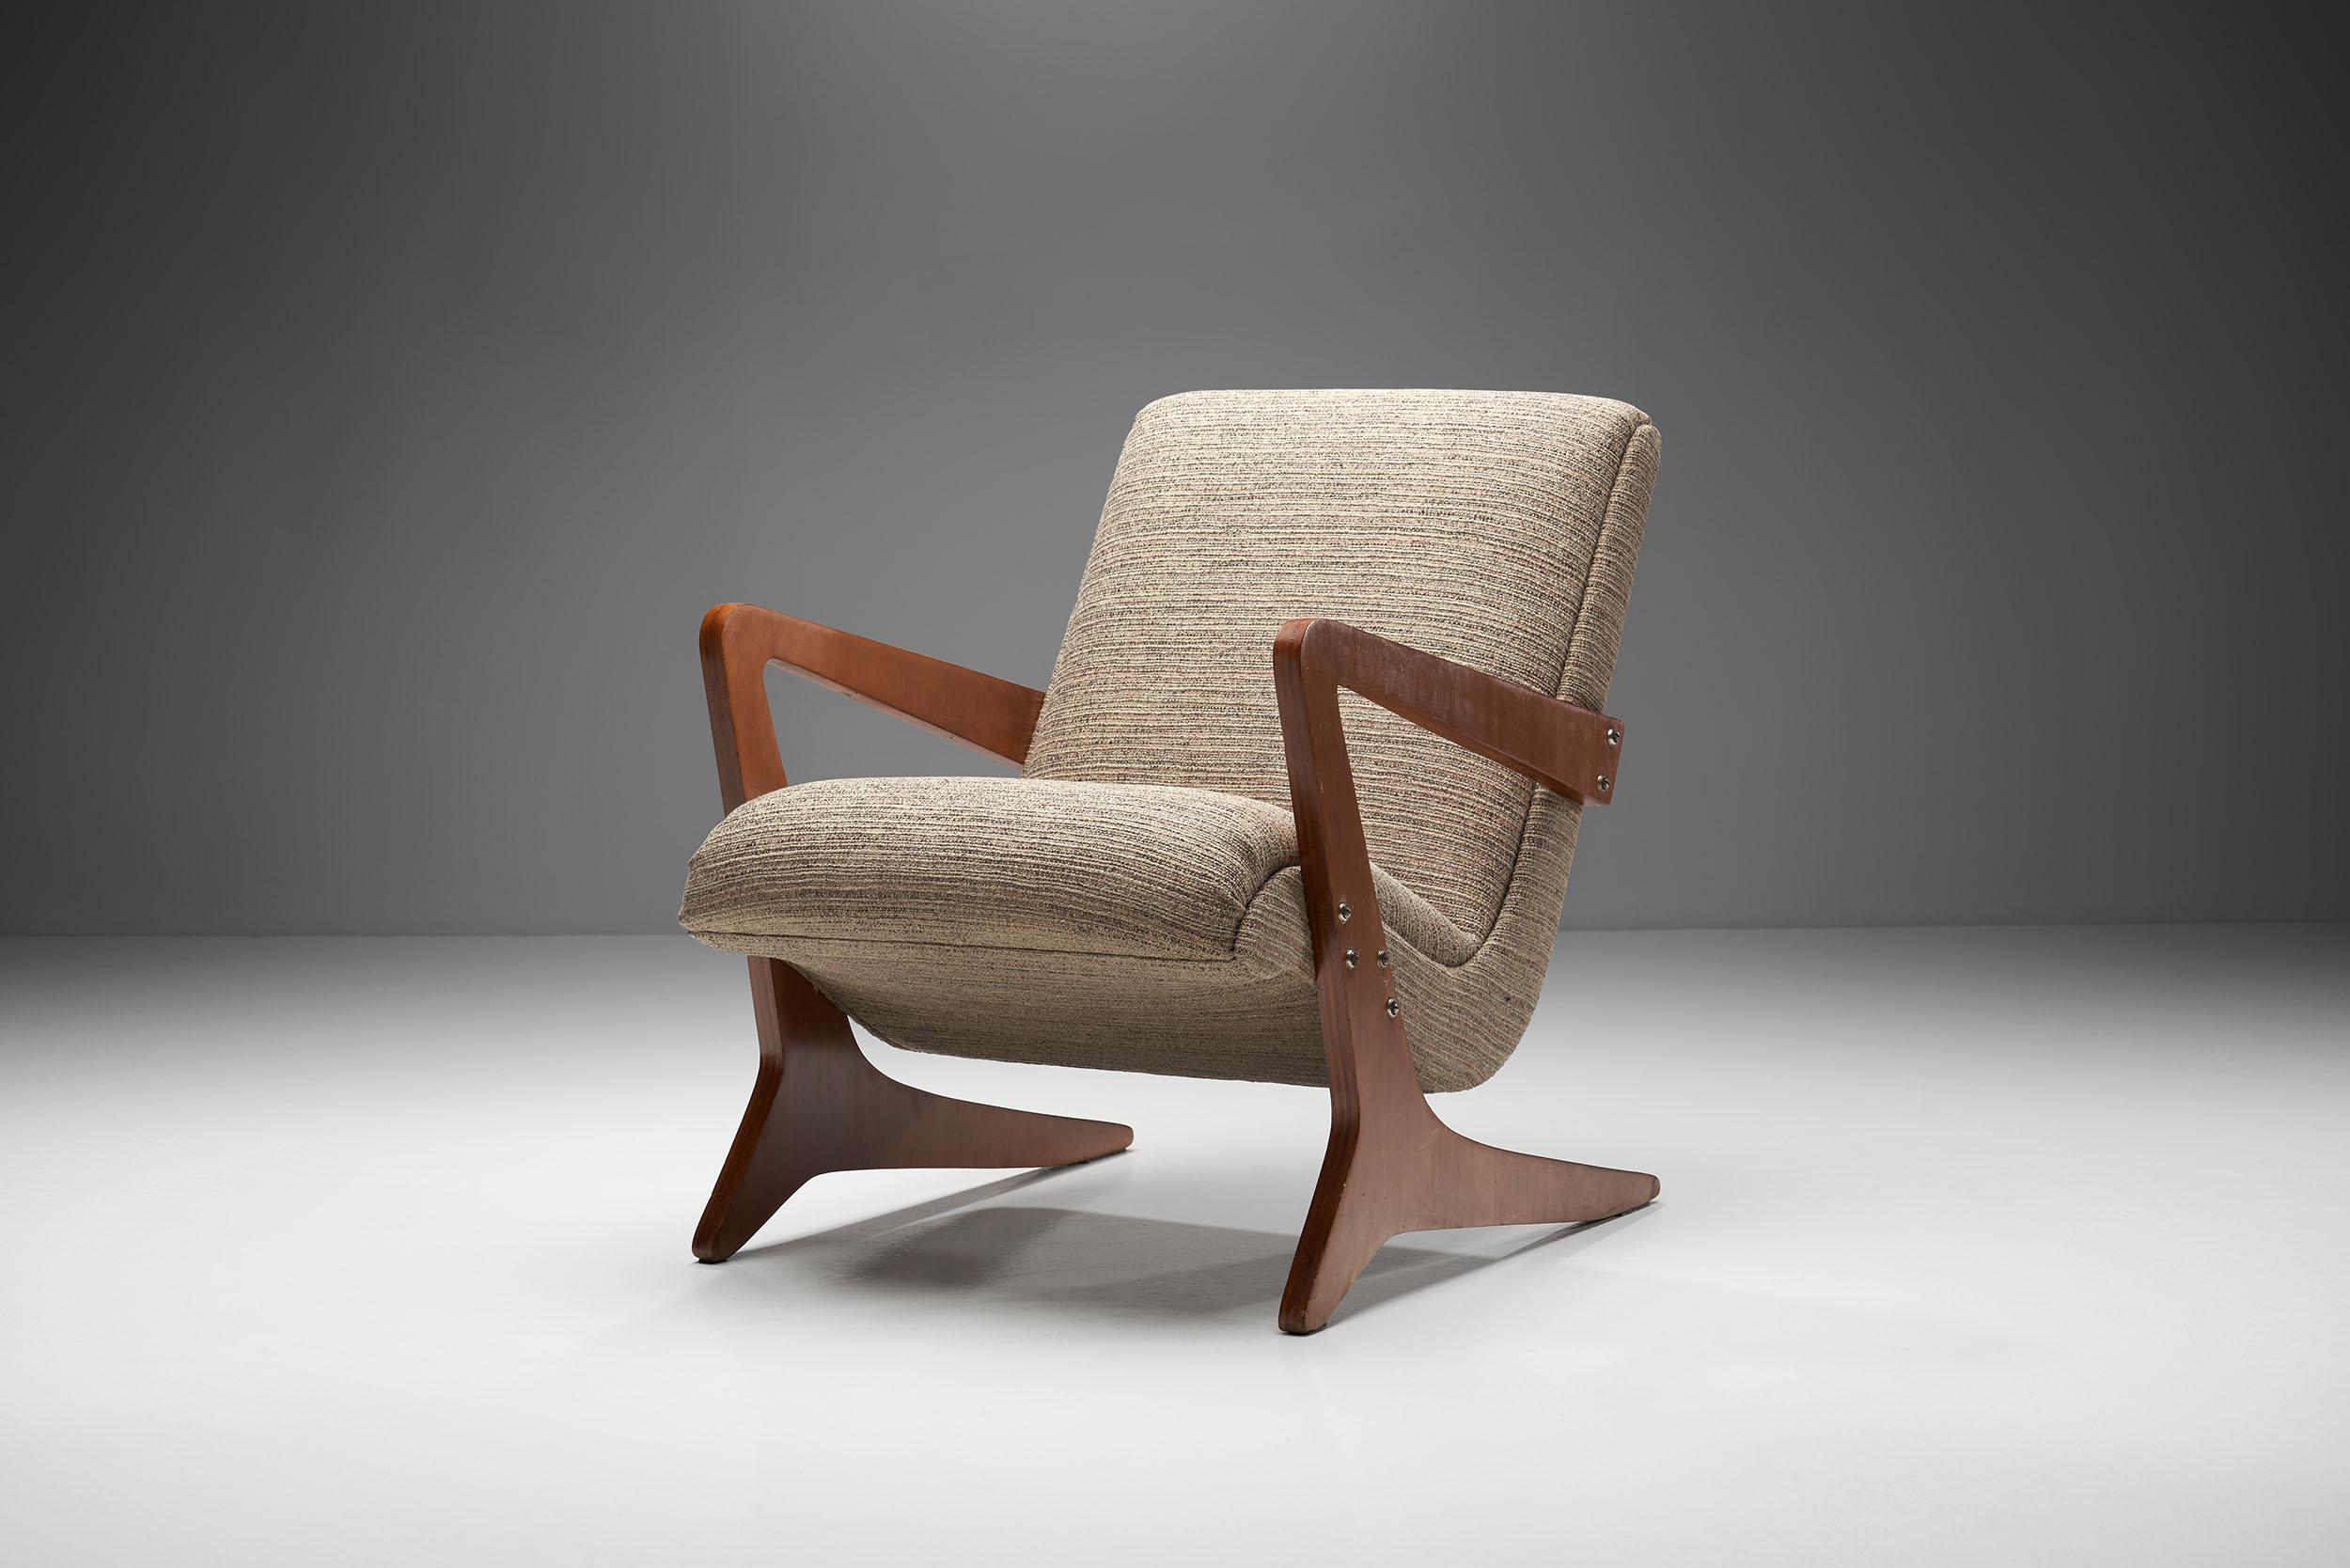 This characteristic “Zeca” armchair was designed by the pioneering Brazilian designer, Jose Zanine Caldas. Made of solid wood, this armchair was named after the childhood nickname of the designer.

Zanine Caldas is often referred to as the “Master